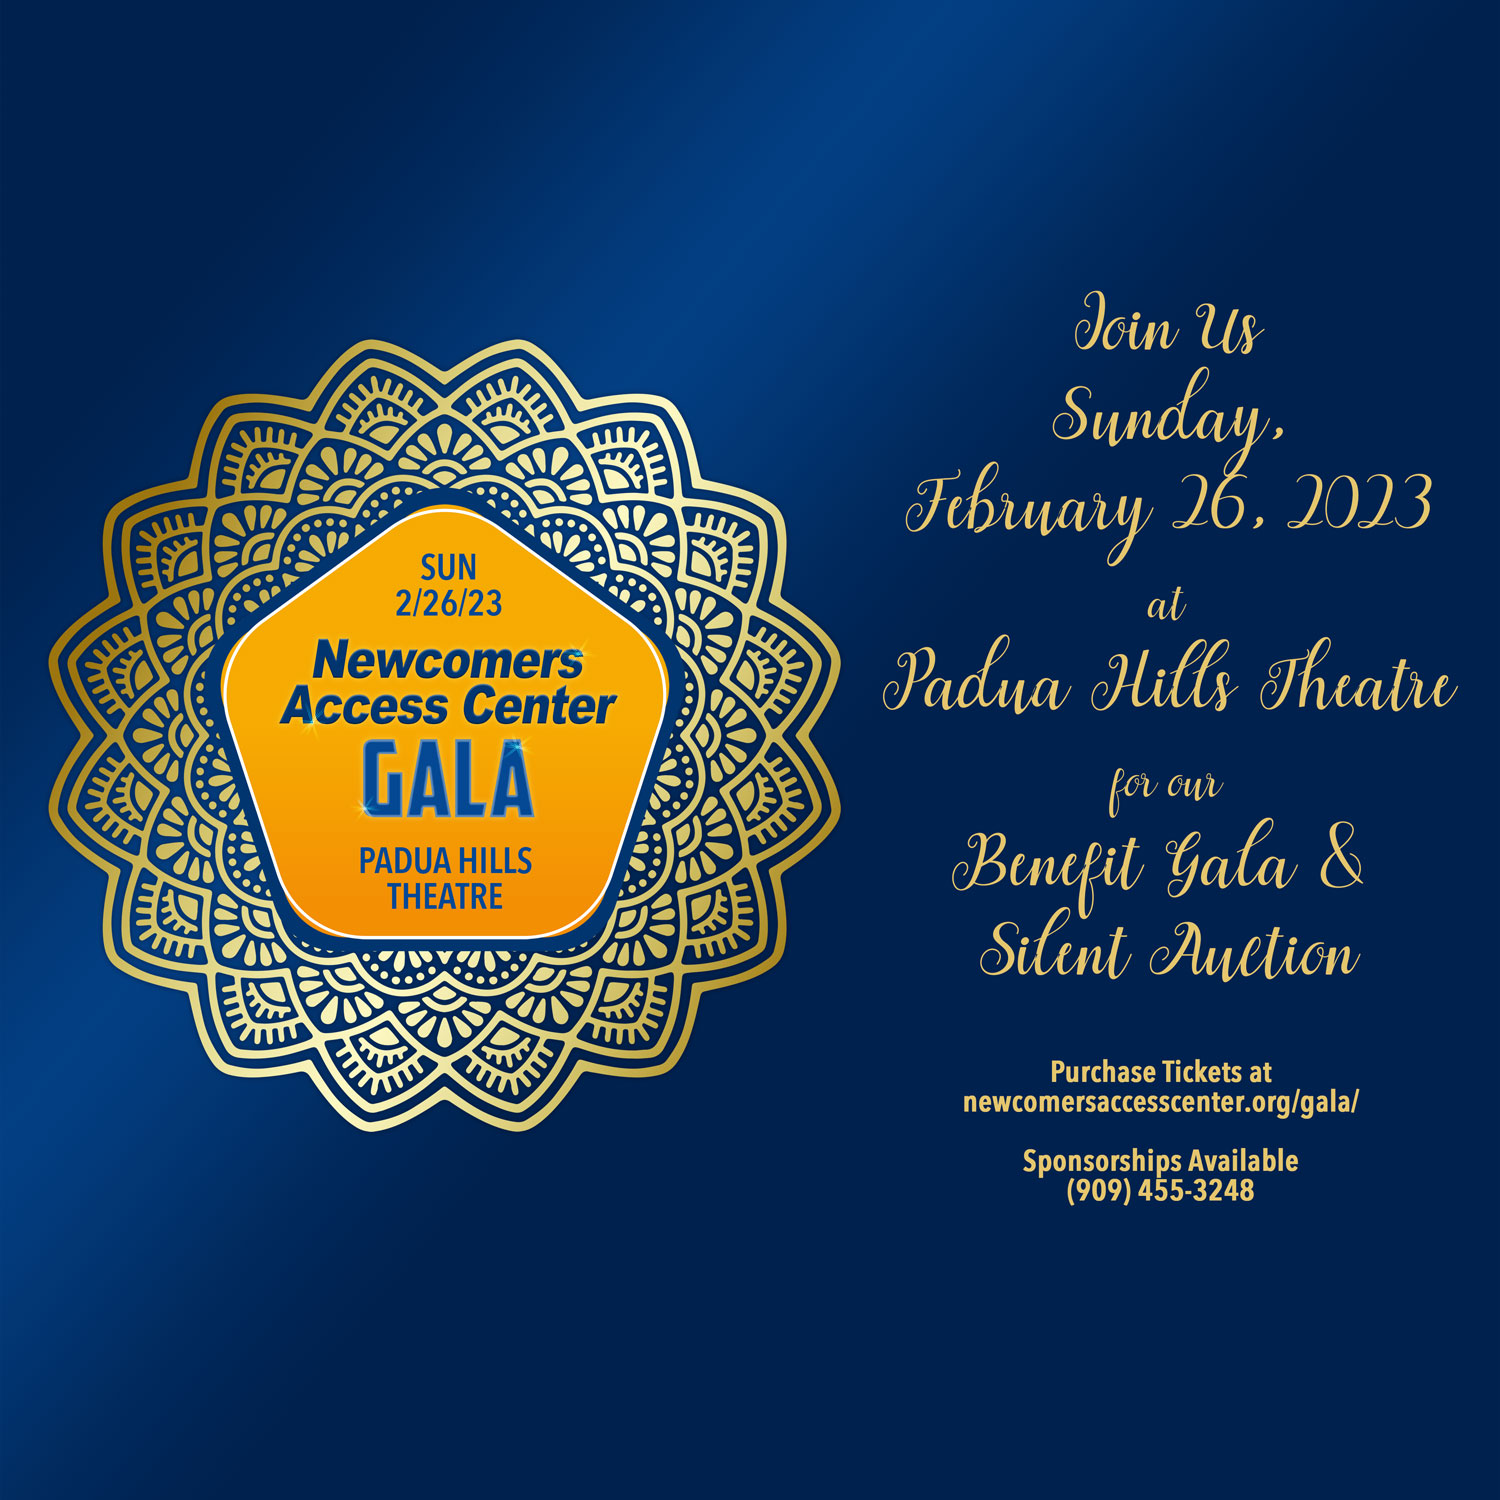 Save the Date 2/26/23 for Gala